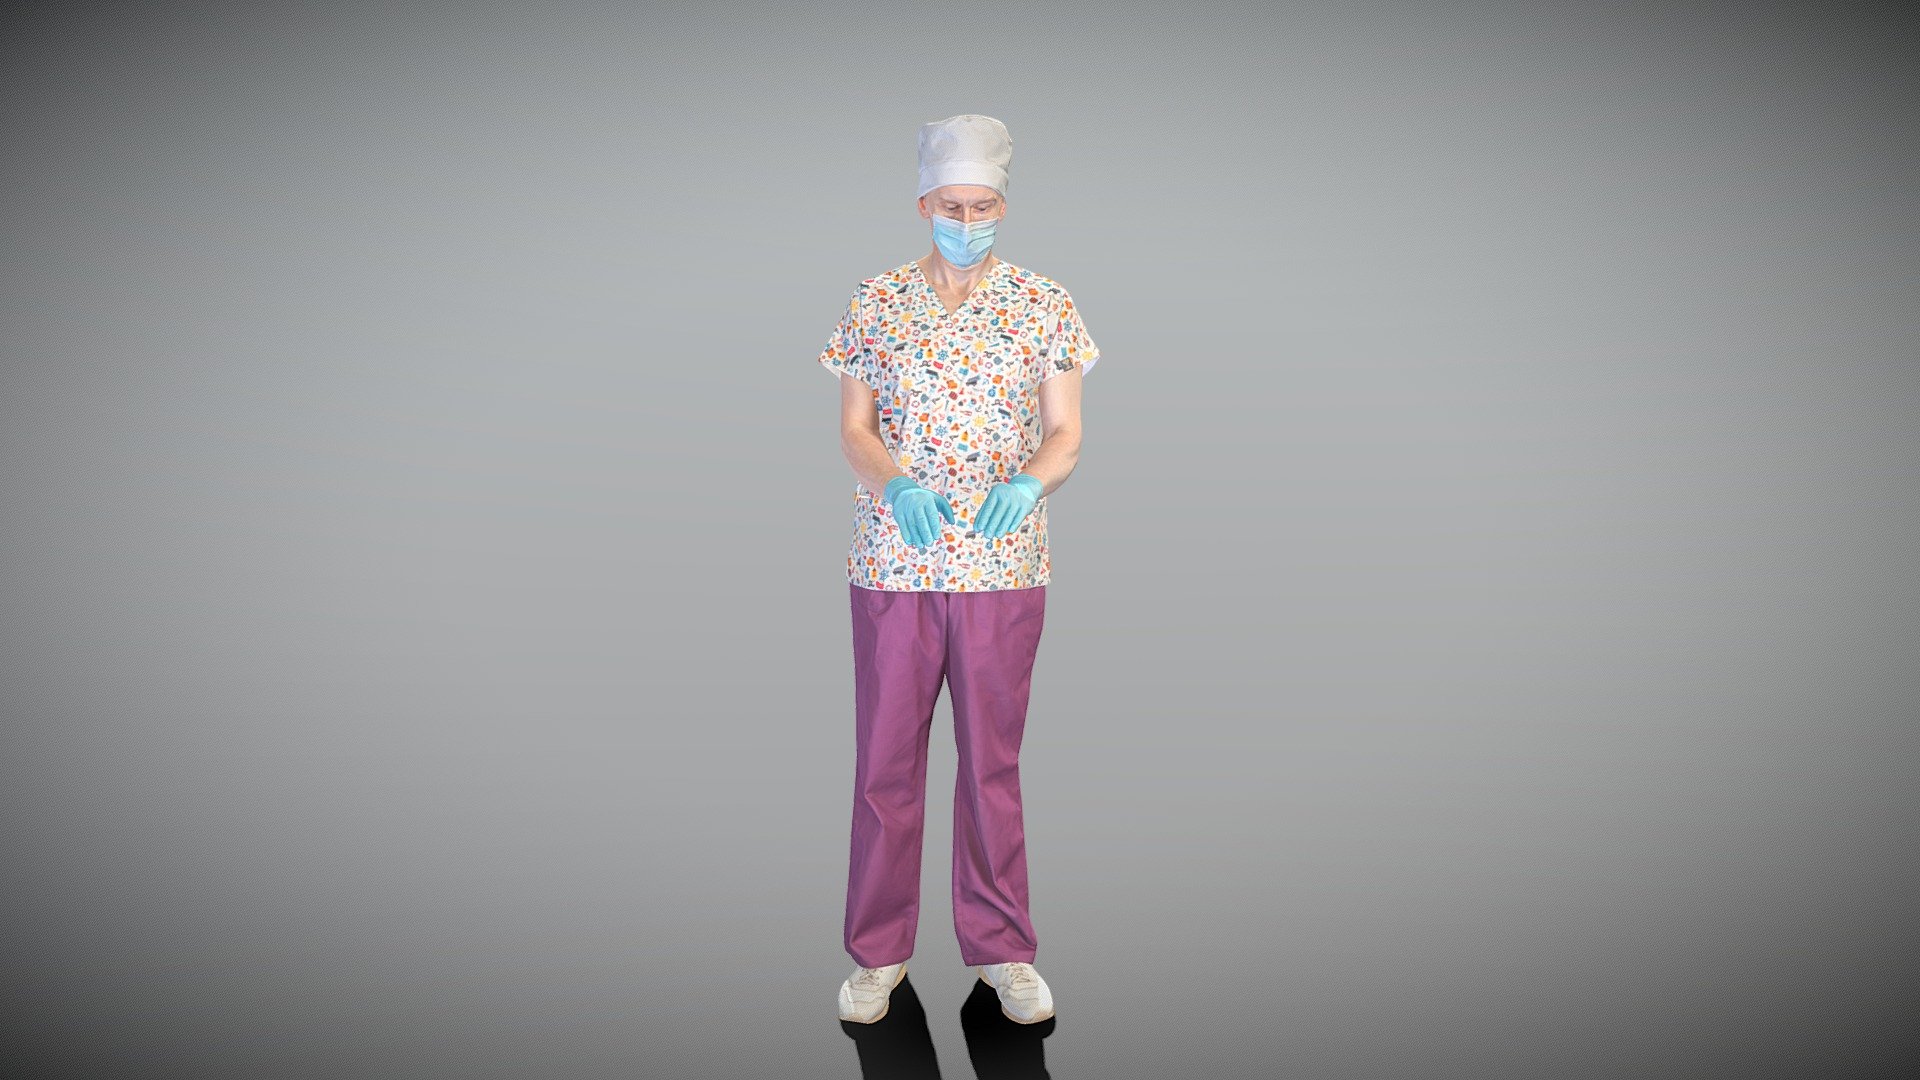 This is a true human size and detailed model of a handsome man of Caucasian appearance dressed in a medical uniform. The model is captured in typical professional pose to perfectly match a variety of architectural and product visualizations, be used as a background or mid-sized character in advert banners, professional products/devices presentations, educational tutorials, VR/AR content, etc.

Technical specifications:




digital double 3d scan model

150k &amp; 30k triangles | double triangulated

high-poly model (.ztl tool with 5 subdivisions) clean and retopologized automatically via ZRemesher

sufficiently clean

PBR textures 8K resolution: Diffuse, Normal, Specular maps

non-overlapping UV map

no extra plugins are required for this model

Download package includes a Cinema 4D project file with Redshift shader, OBJ, FBX, STL files, which are applicable for 3ds Max, Maya, Unreal Engine, Unity, Blender, etc.

3D EVERYTHING

Stand with Ukraine! - Male doctor performing surgical procedure 399 - Buy Royalty Free 3D model by deep3dstudio 3d model